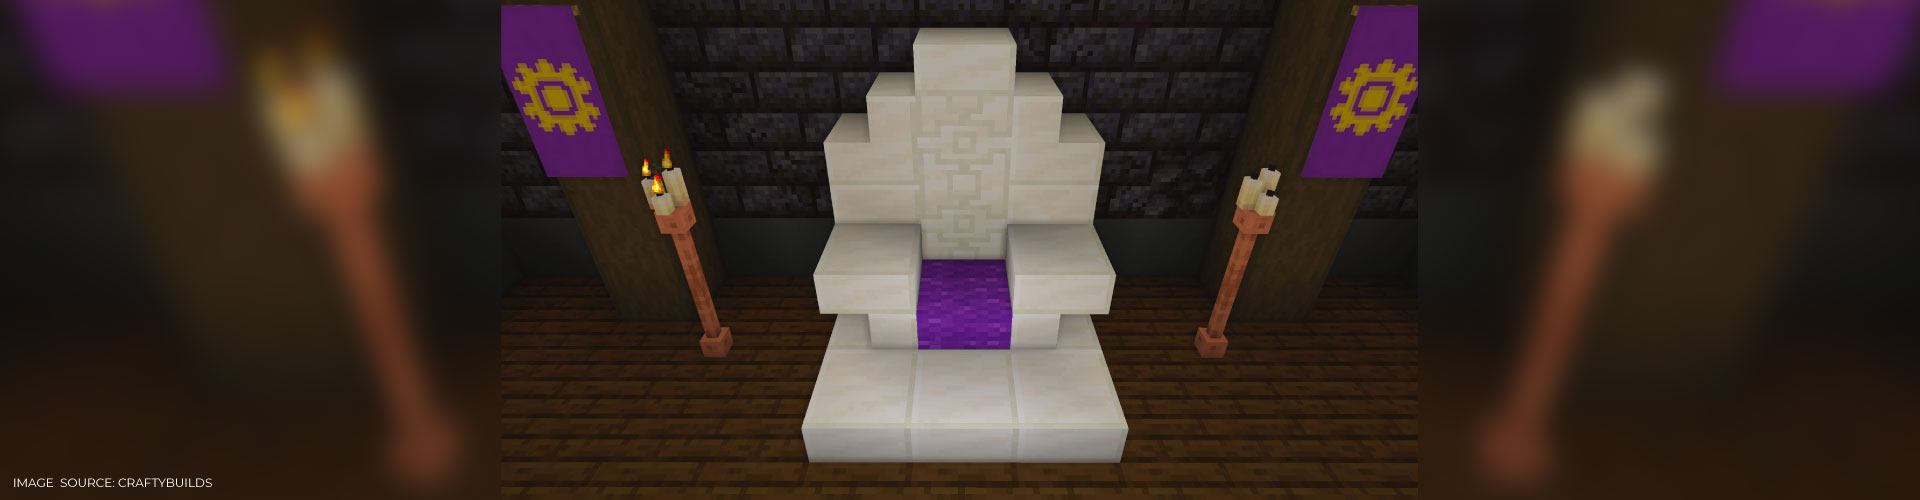 How to Build a Throne in Minecraft